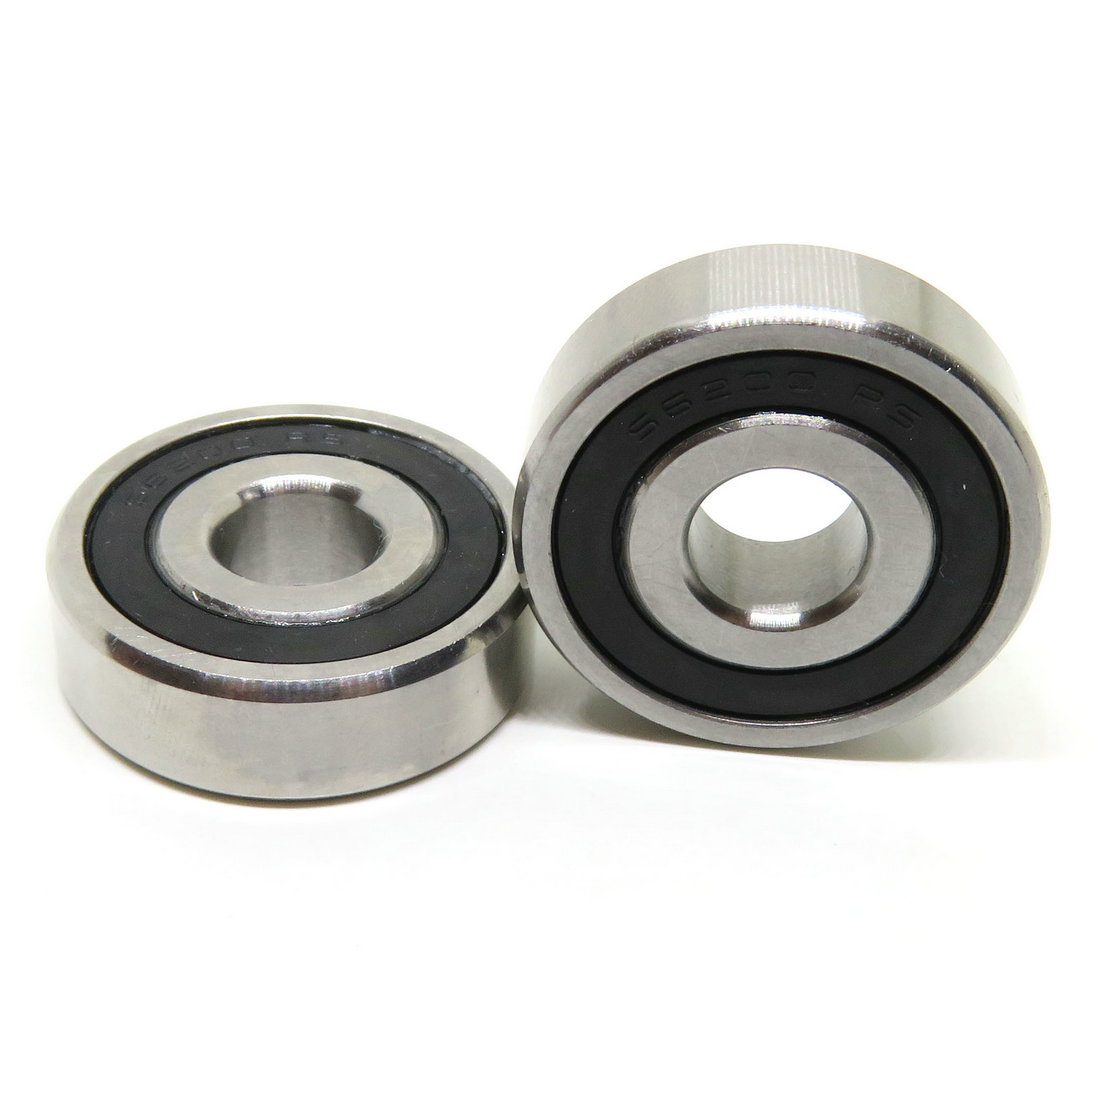 Food Processing Machinery S6309RS Stainless Steel Radial Ball Bearing 45 mm x 100 mm x 25 mm with Double Rubber Seal.jpg